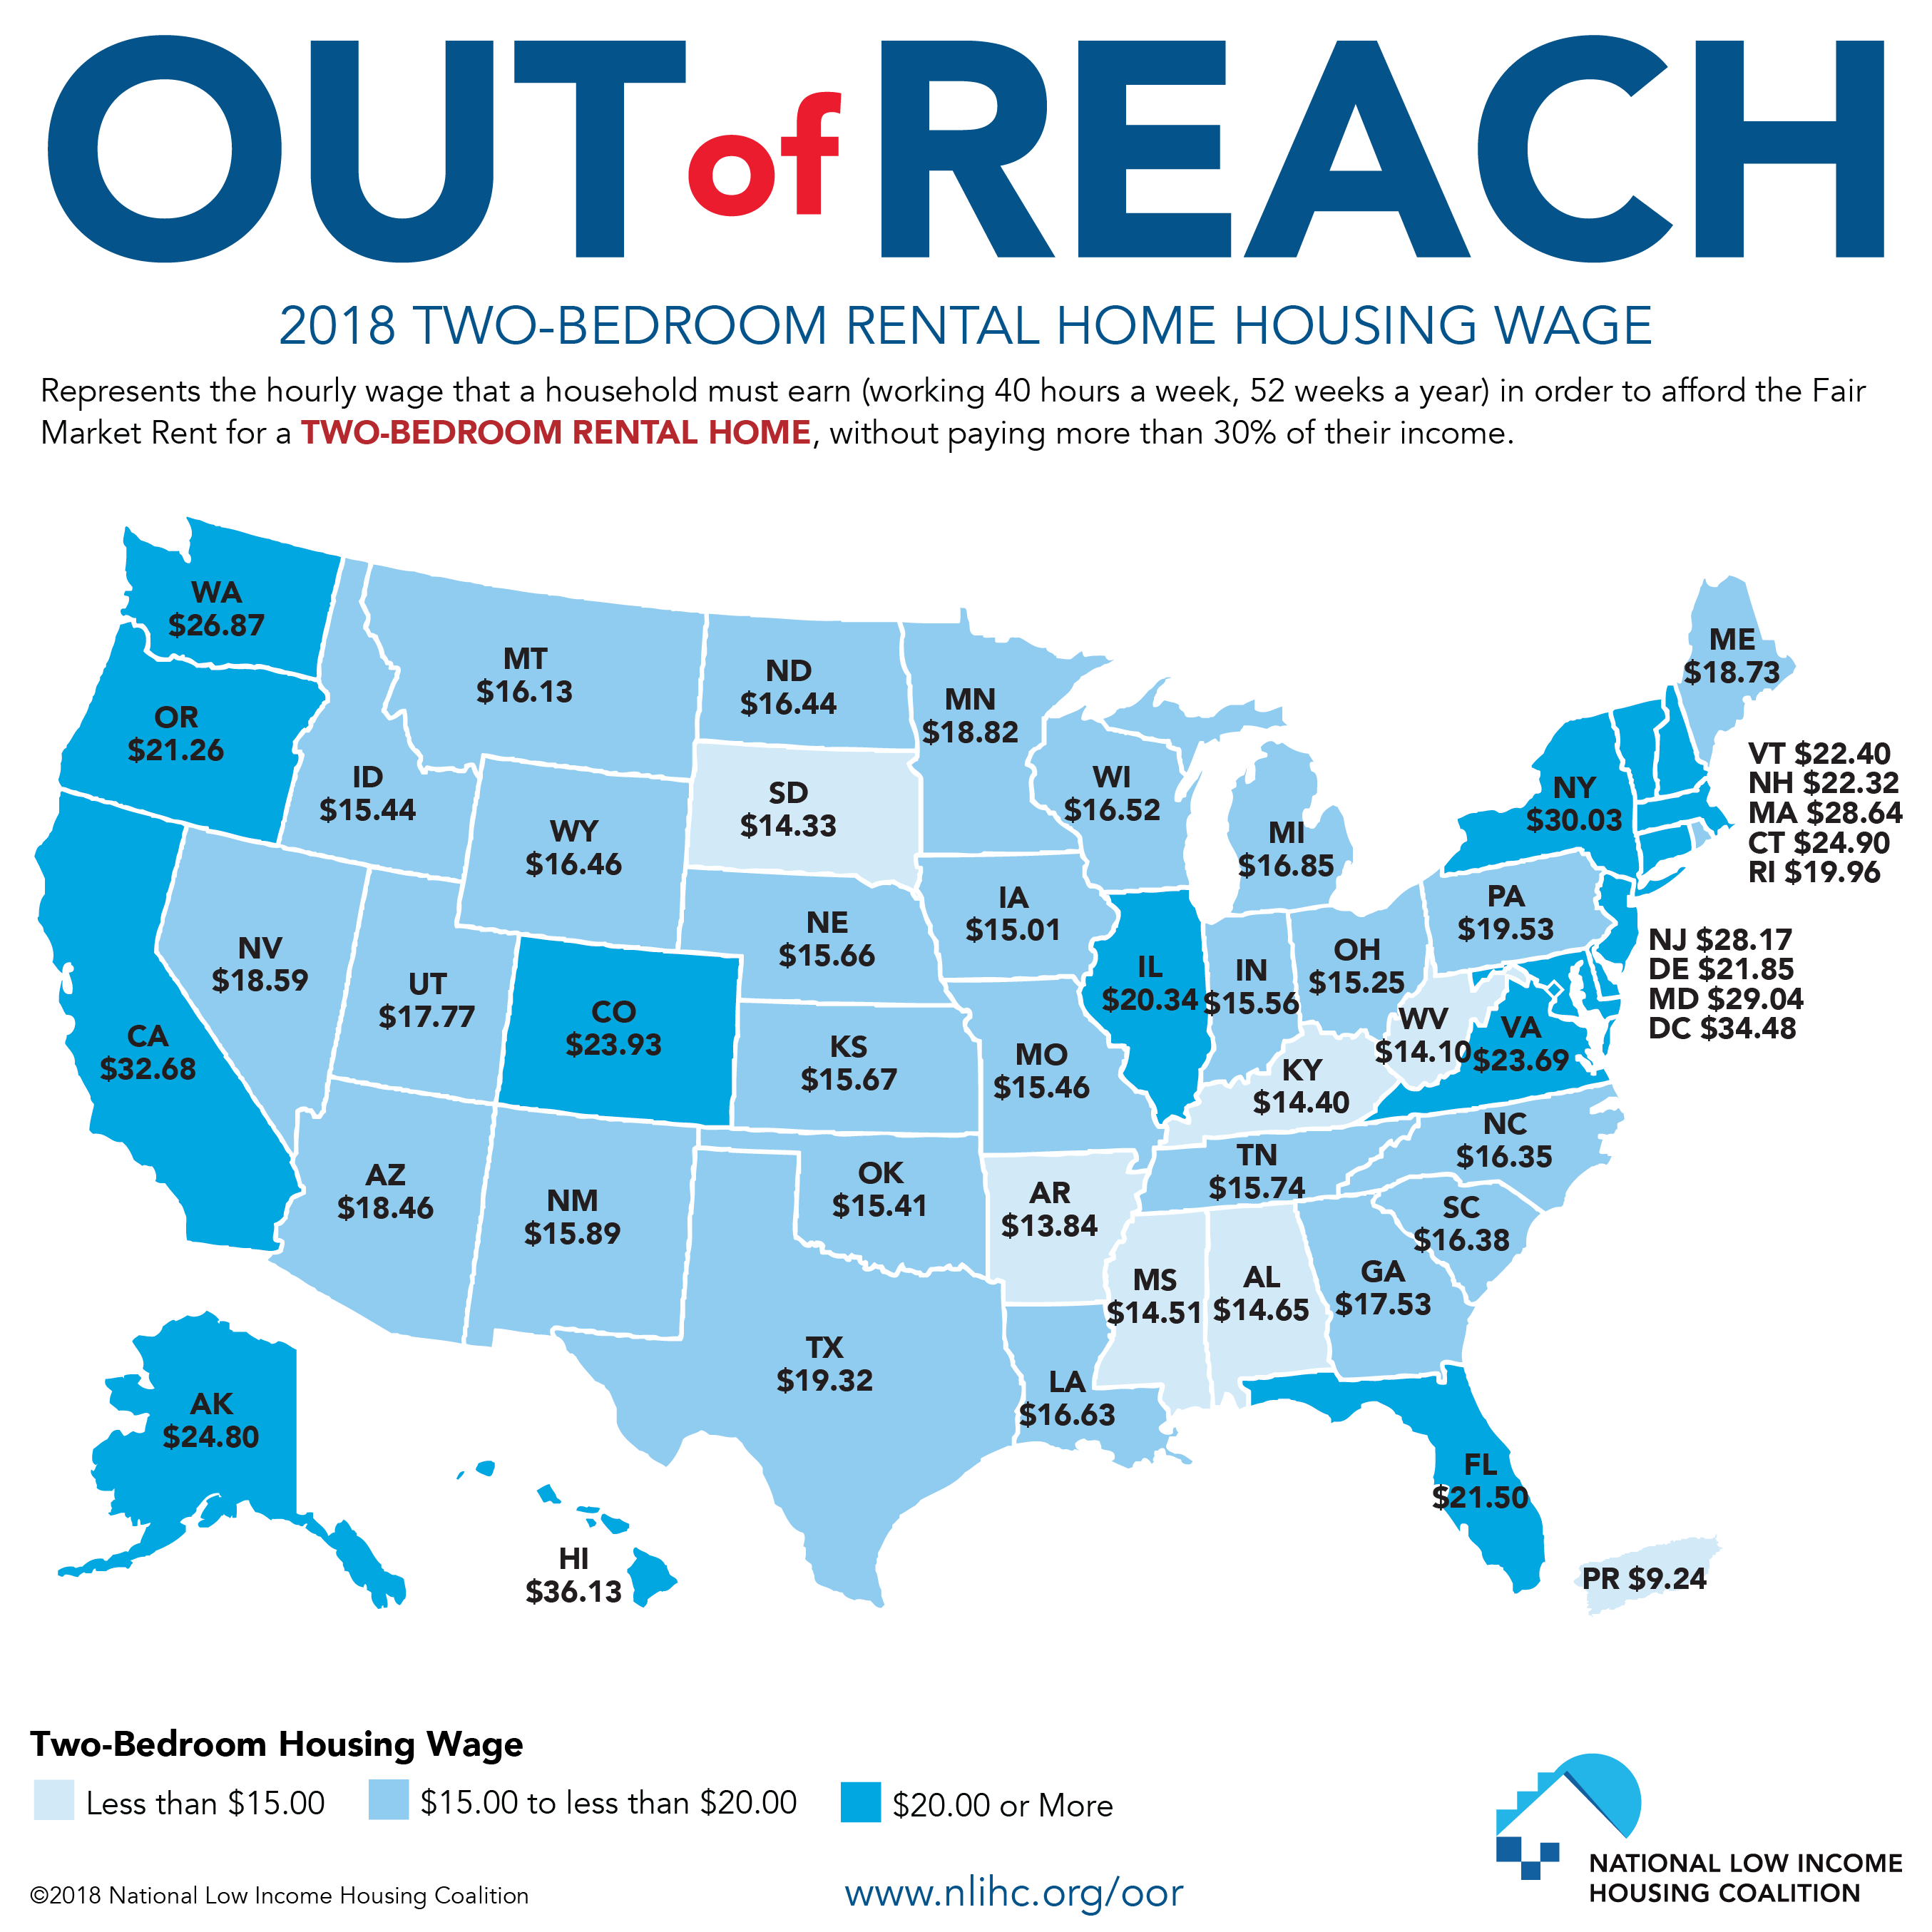 2018 Two-Bedroom Rental Unit Housing Wage